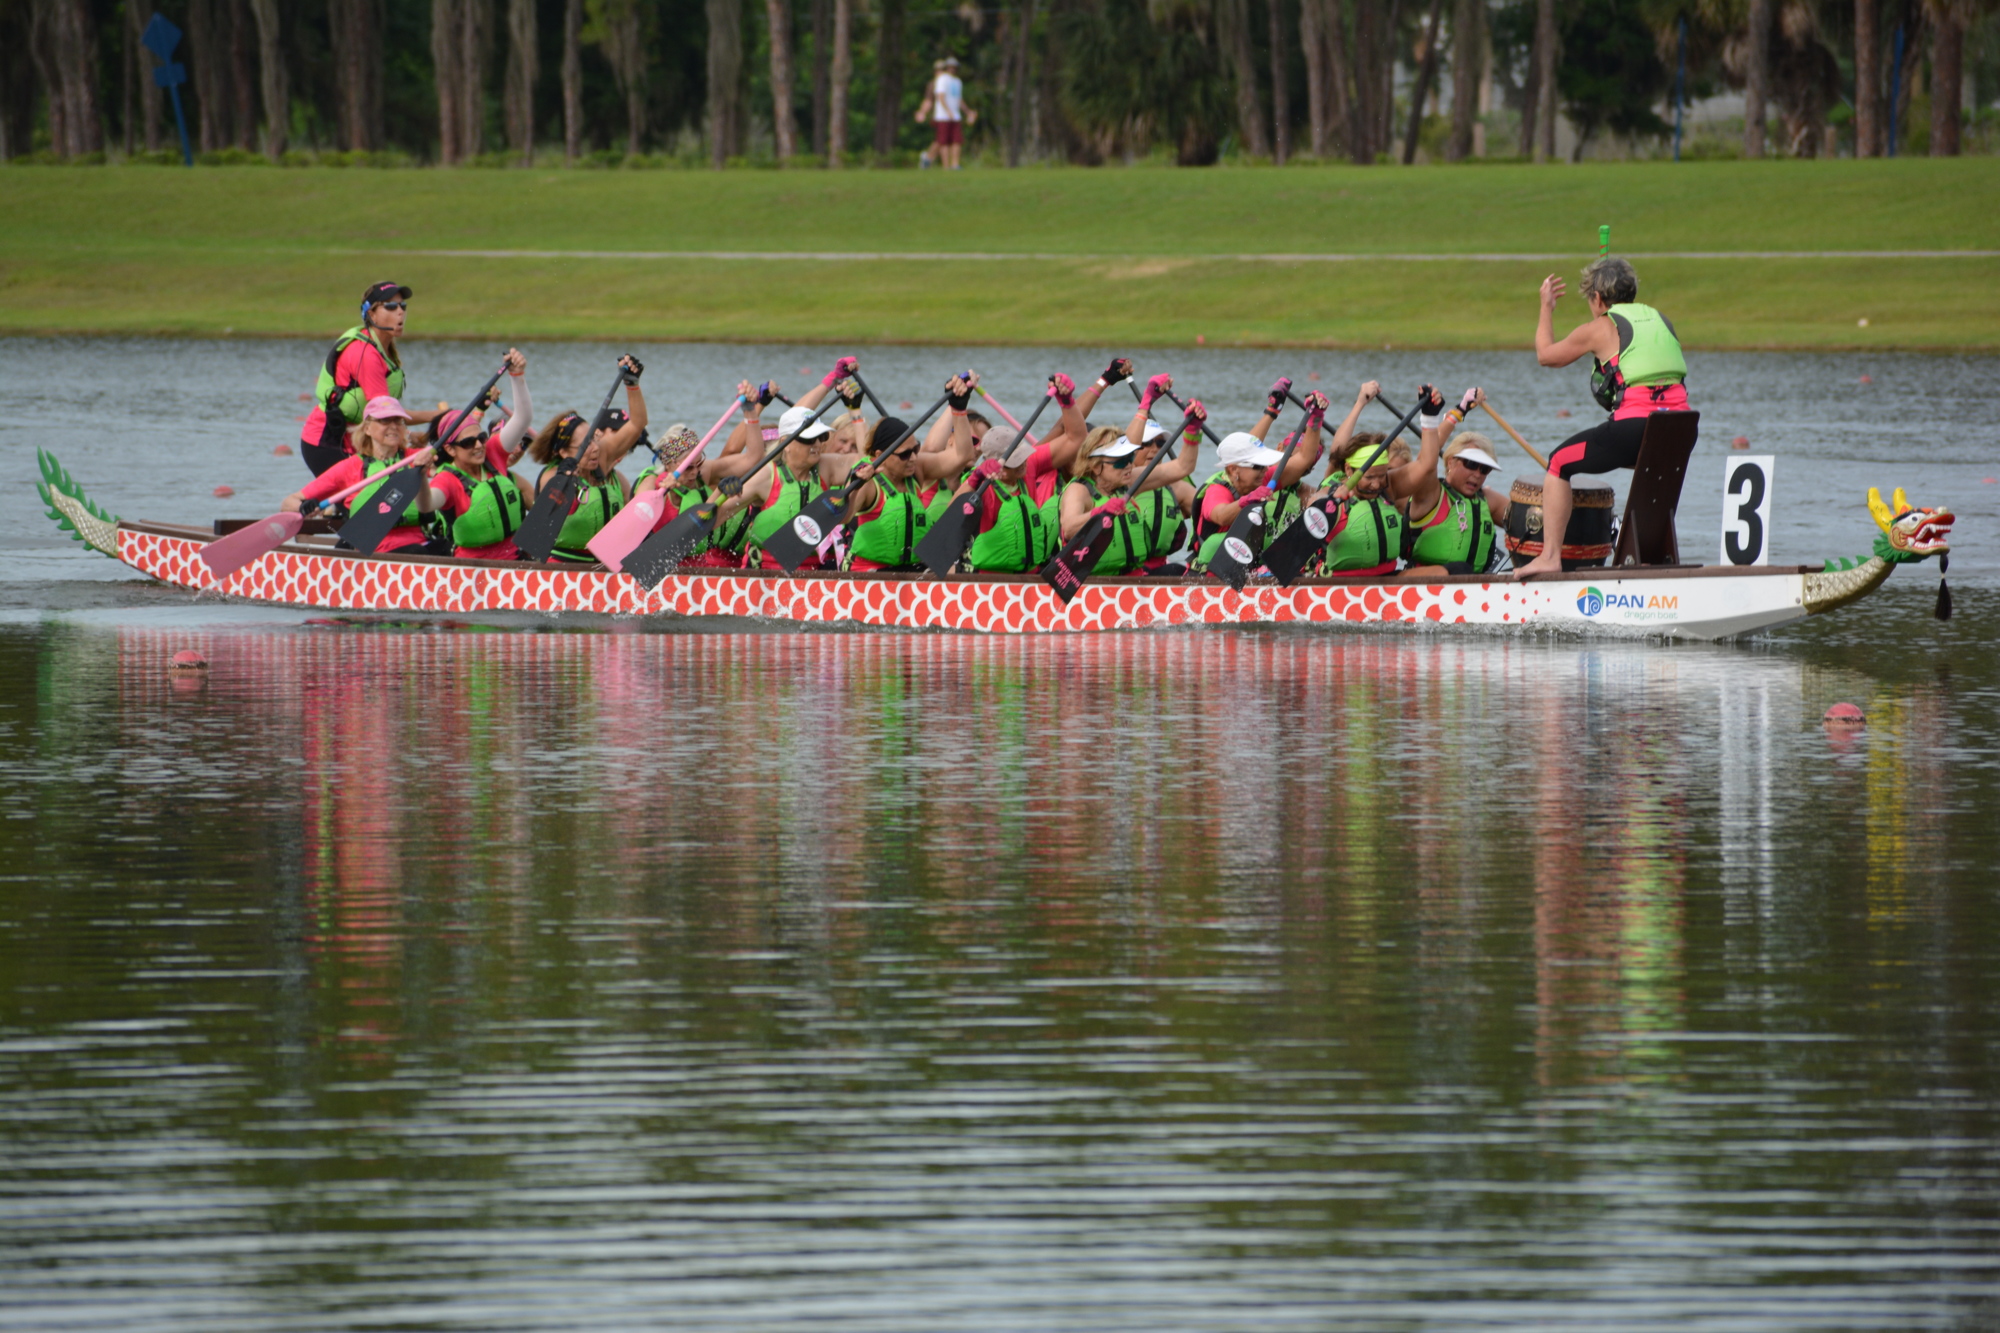 Survivors in Sync loads up for a race as do other competitors during a June dragon boat competition at Nathan Benderson Park. File photo.